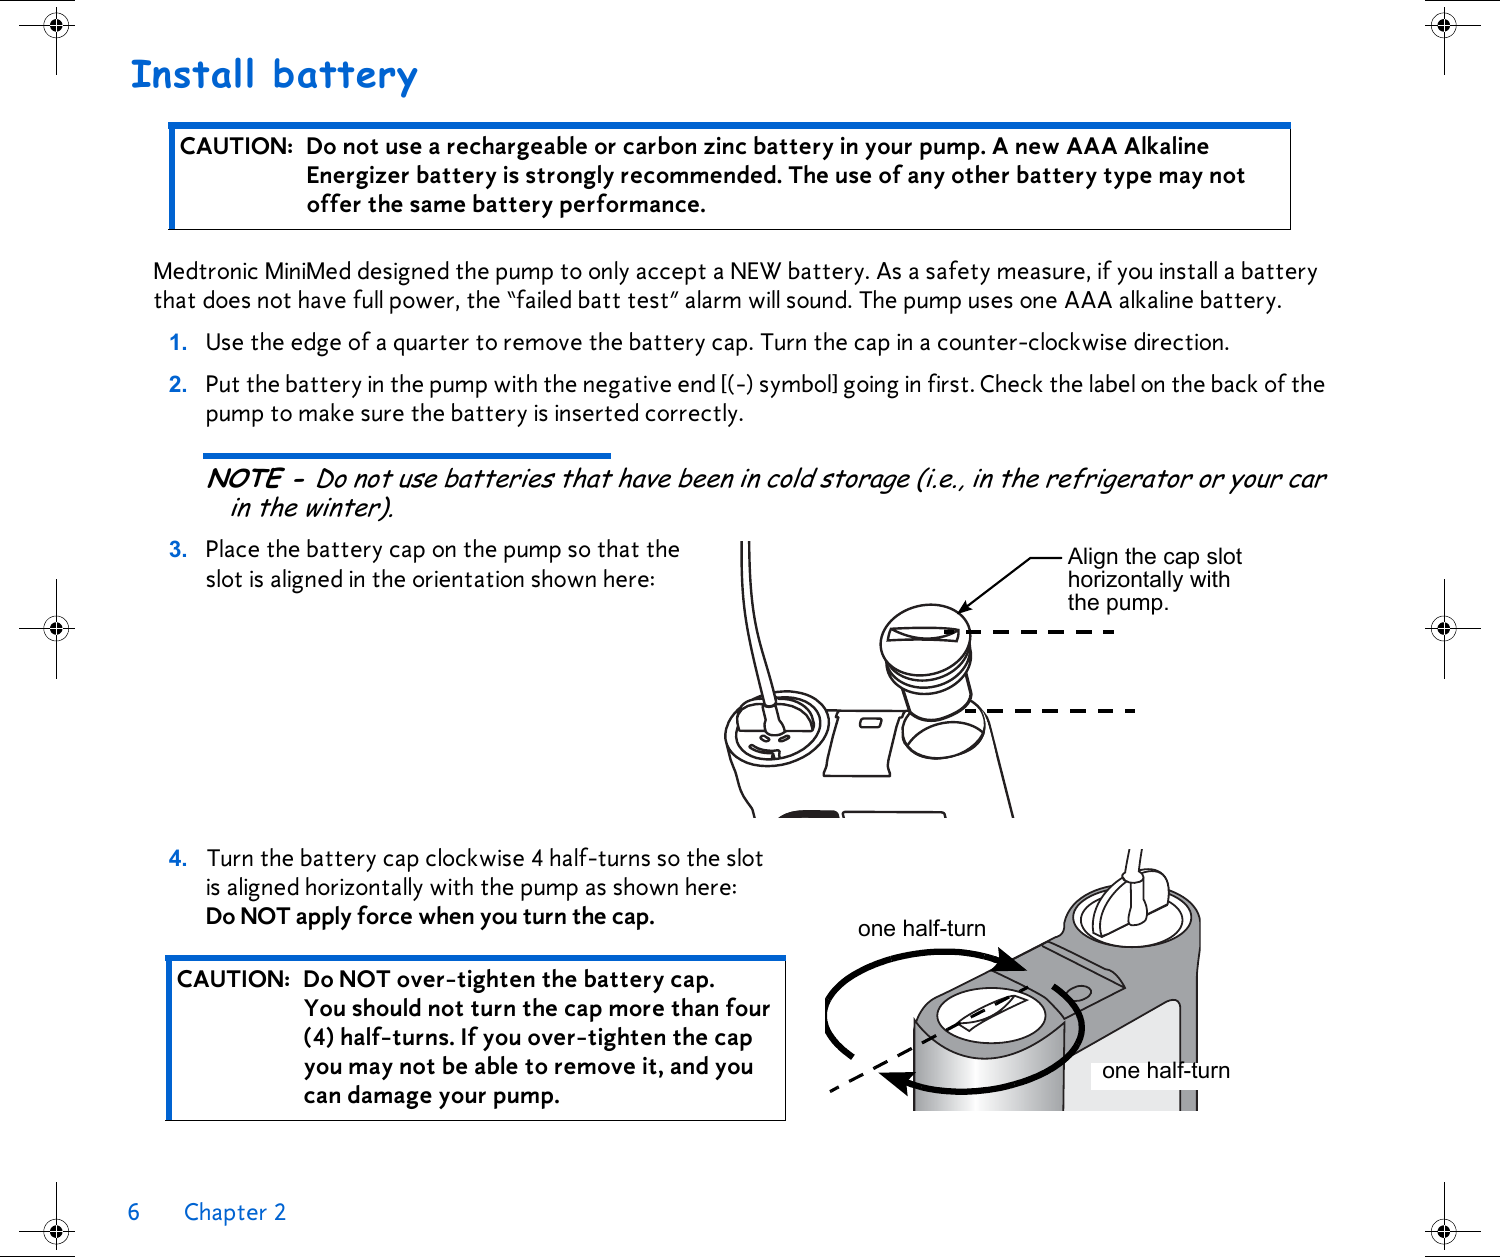 6 Chapter 2 Install batteryMedtronic MiniMed designed the pump to only accept a NEW battery. As a safety measure, if you install a battery that does not have full power, the “failed batt test” alarm will sound. The pump uses one AAA alkaline battery.1. Use the edge of a quarter to remove the battery cap. Turn the cap in a counter-clockwise direction. 2. Put the battery in the pump with the negative end [(-) symbol] going in first. Check the label on the back of the pump to make sure the battery is inserted correctly.NOTE - Do not use batteries that have been in cold storage (i.e., in the refrigerator or your car in the winter).3. Place the battery cap on the pump so that the slot is aligned in the orientation shown here: 4. Turn the battery cap clockwise 4 half-turns so the slot is aligned horizontally with the pump as shown here: Do NOT apply force when you turn the cap. CAUTION: Do not use a rechargeable or carbon zinc battery in your pump. A new AAA Alkaline Energizer battery is strongly recommended. The use of any other battery type may not offer the same battery performance.CAUTION: Do NOT over-tighten the battery cap. You should not turn the cap more than four (4) half-turns. If you over-tighten the cap you may not be able to remove it, and you can damage your pump. Align the cap slot horizontally with the pump.one half-turnone half-turn